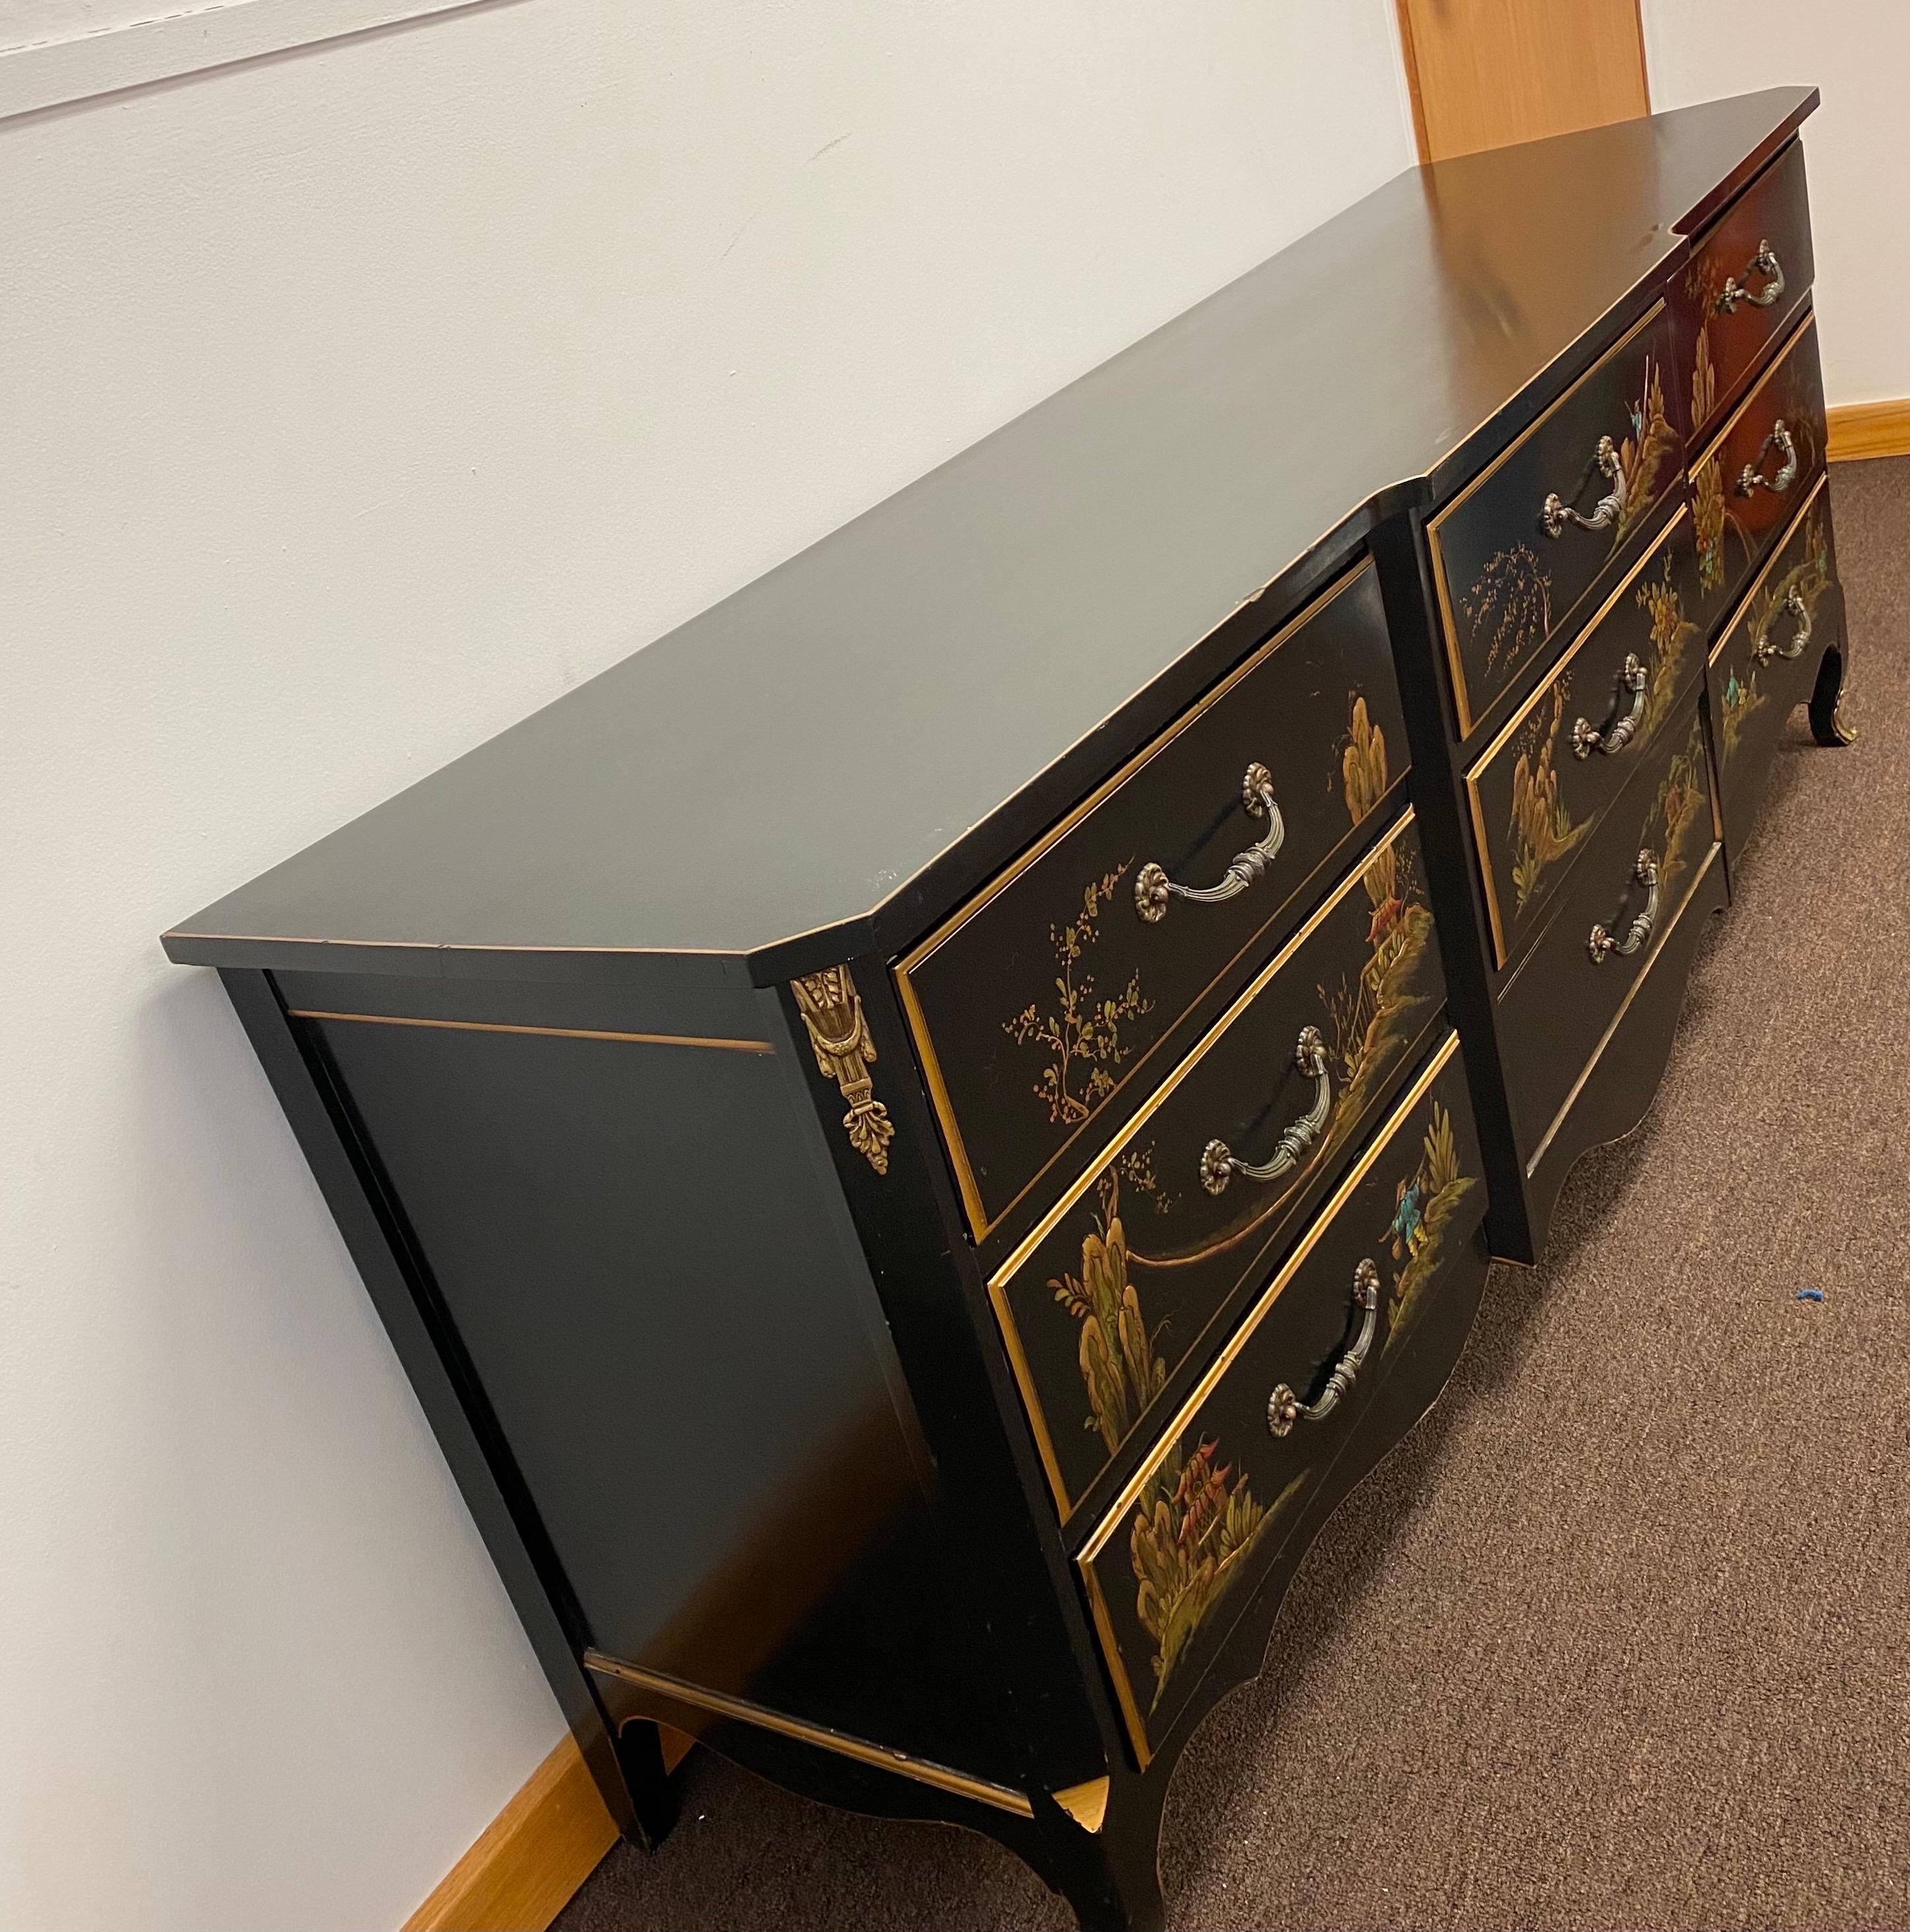 We are very pleased to offer a stunning Asian style dresser, circa the 1950s. Showcasing a French Louis XV Chinoiserie style, this piece is crafted from solid wood and finished in a rich black lacquer. Nine spacious drawers tuck away clothes and